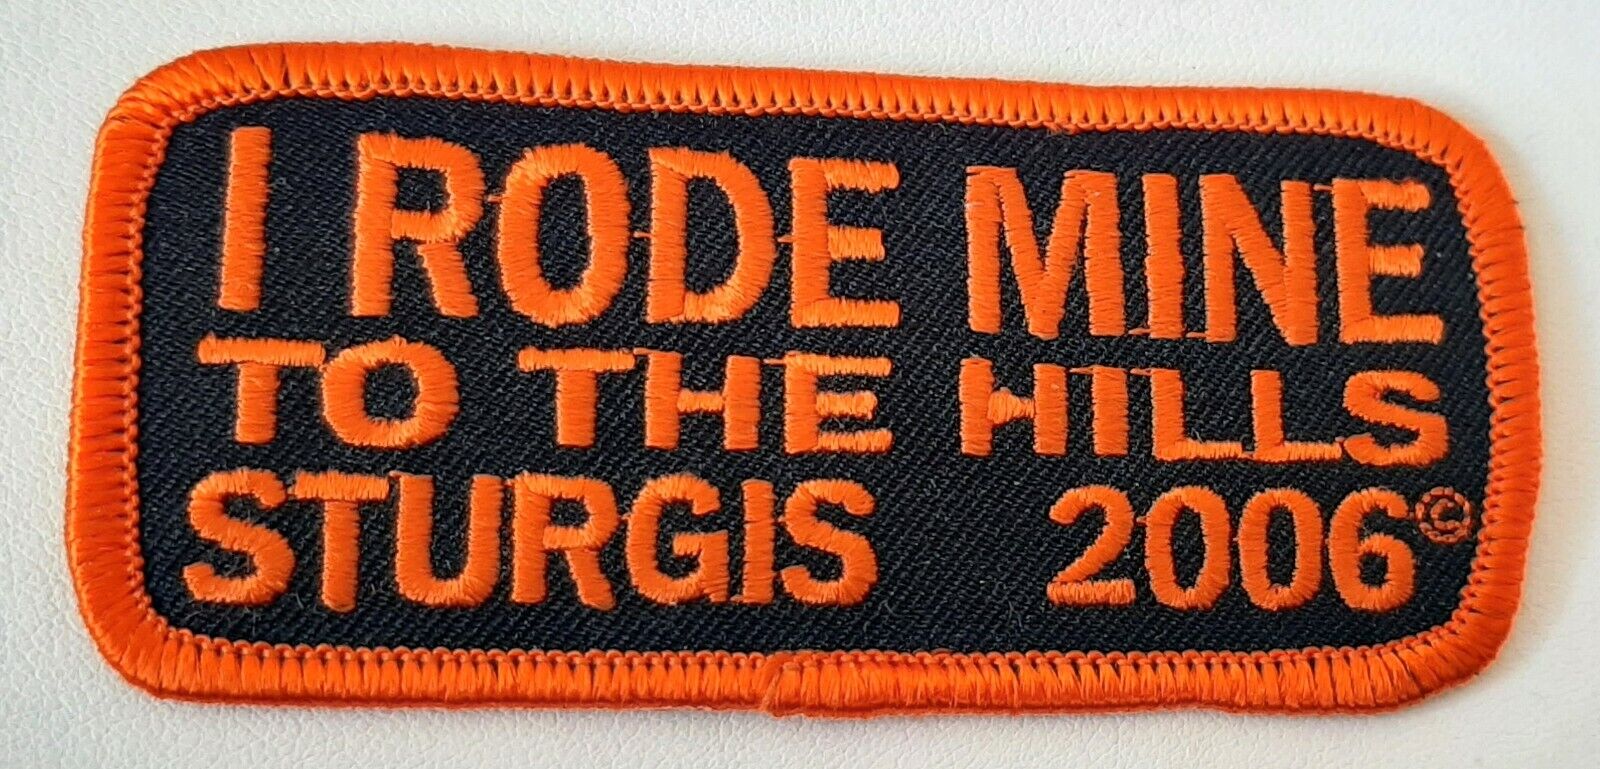 Harley Davidson Motorcycle Patch I RODE MINE TO THE HILLS STURGIS 2006 Rally